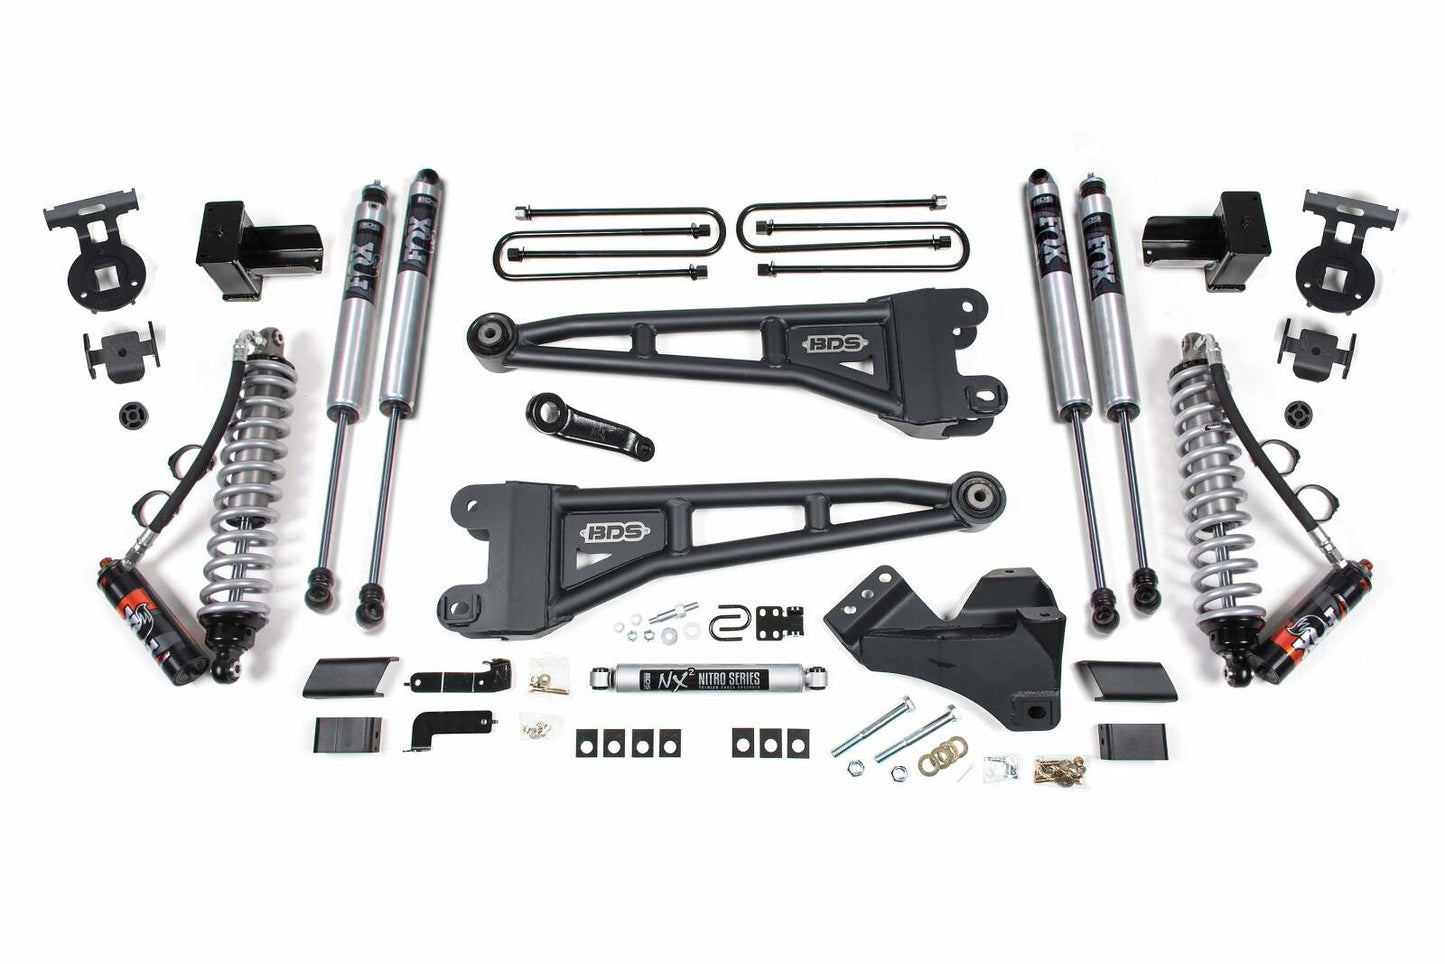 2017-2019 Ford F350 4wd Dually 4" Radius Arm Suspension Lift Kit, 3" Rear, Block, Diesel - Fox 2.5 PES C/O Front, Fox 2.0 IFP PS Aux Front, Fox 2.0 IFP PS Rear